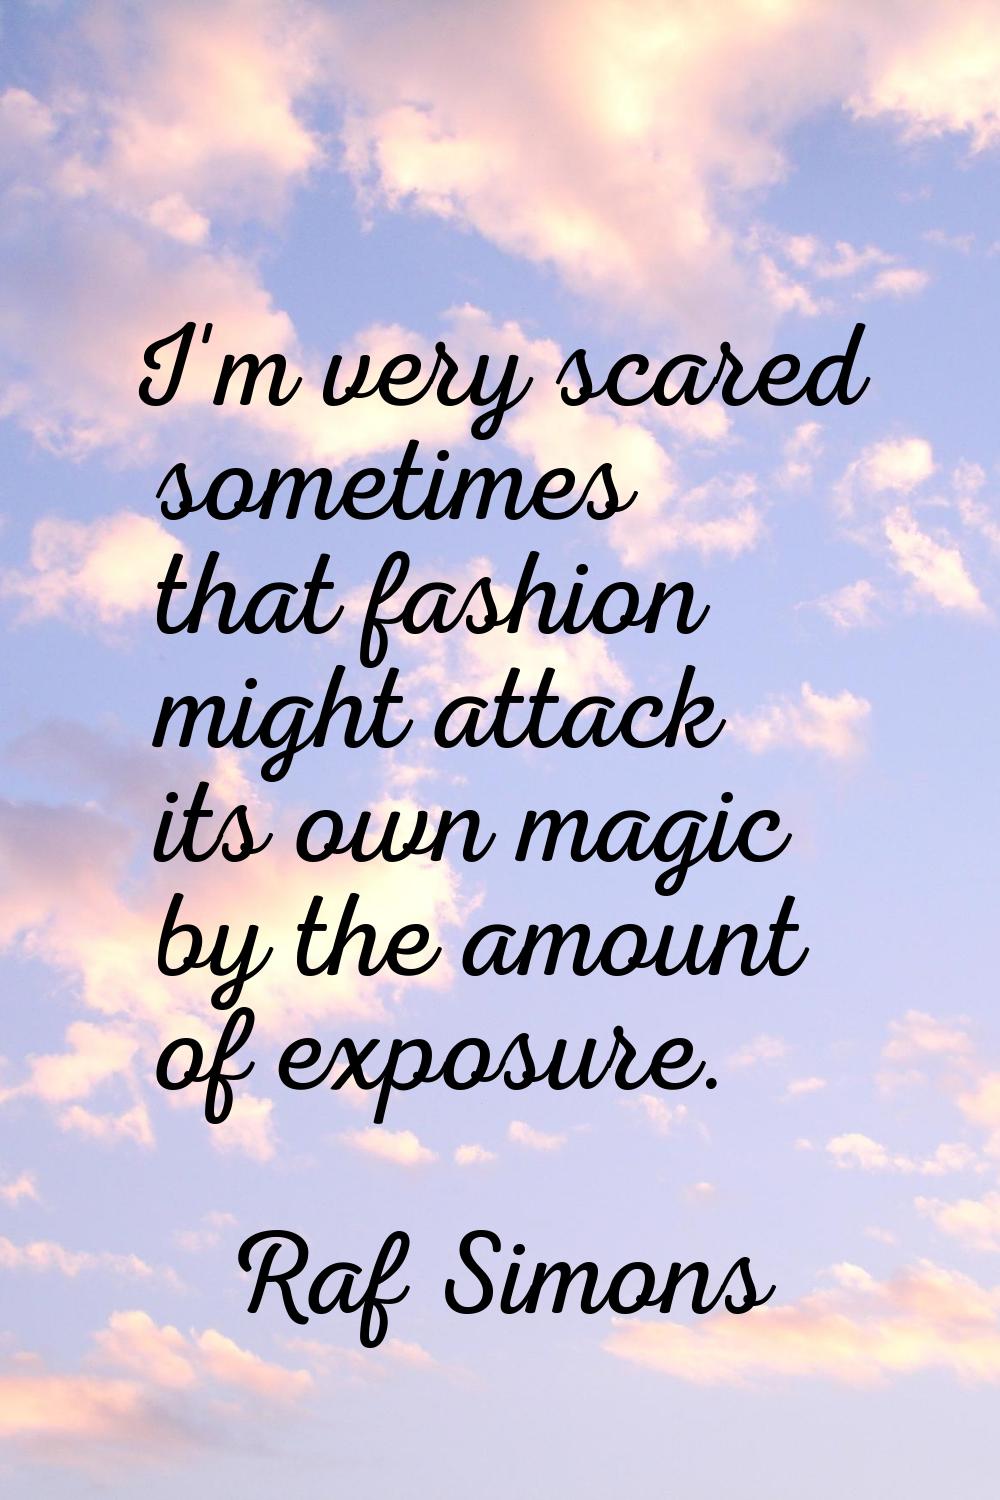 I'm very scared sometimes that fashion might attack its own magic by the amount of exposure.